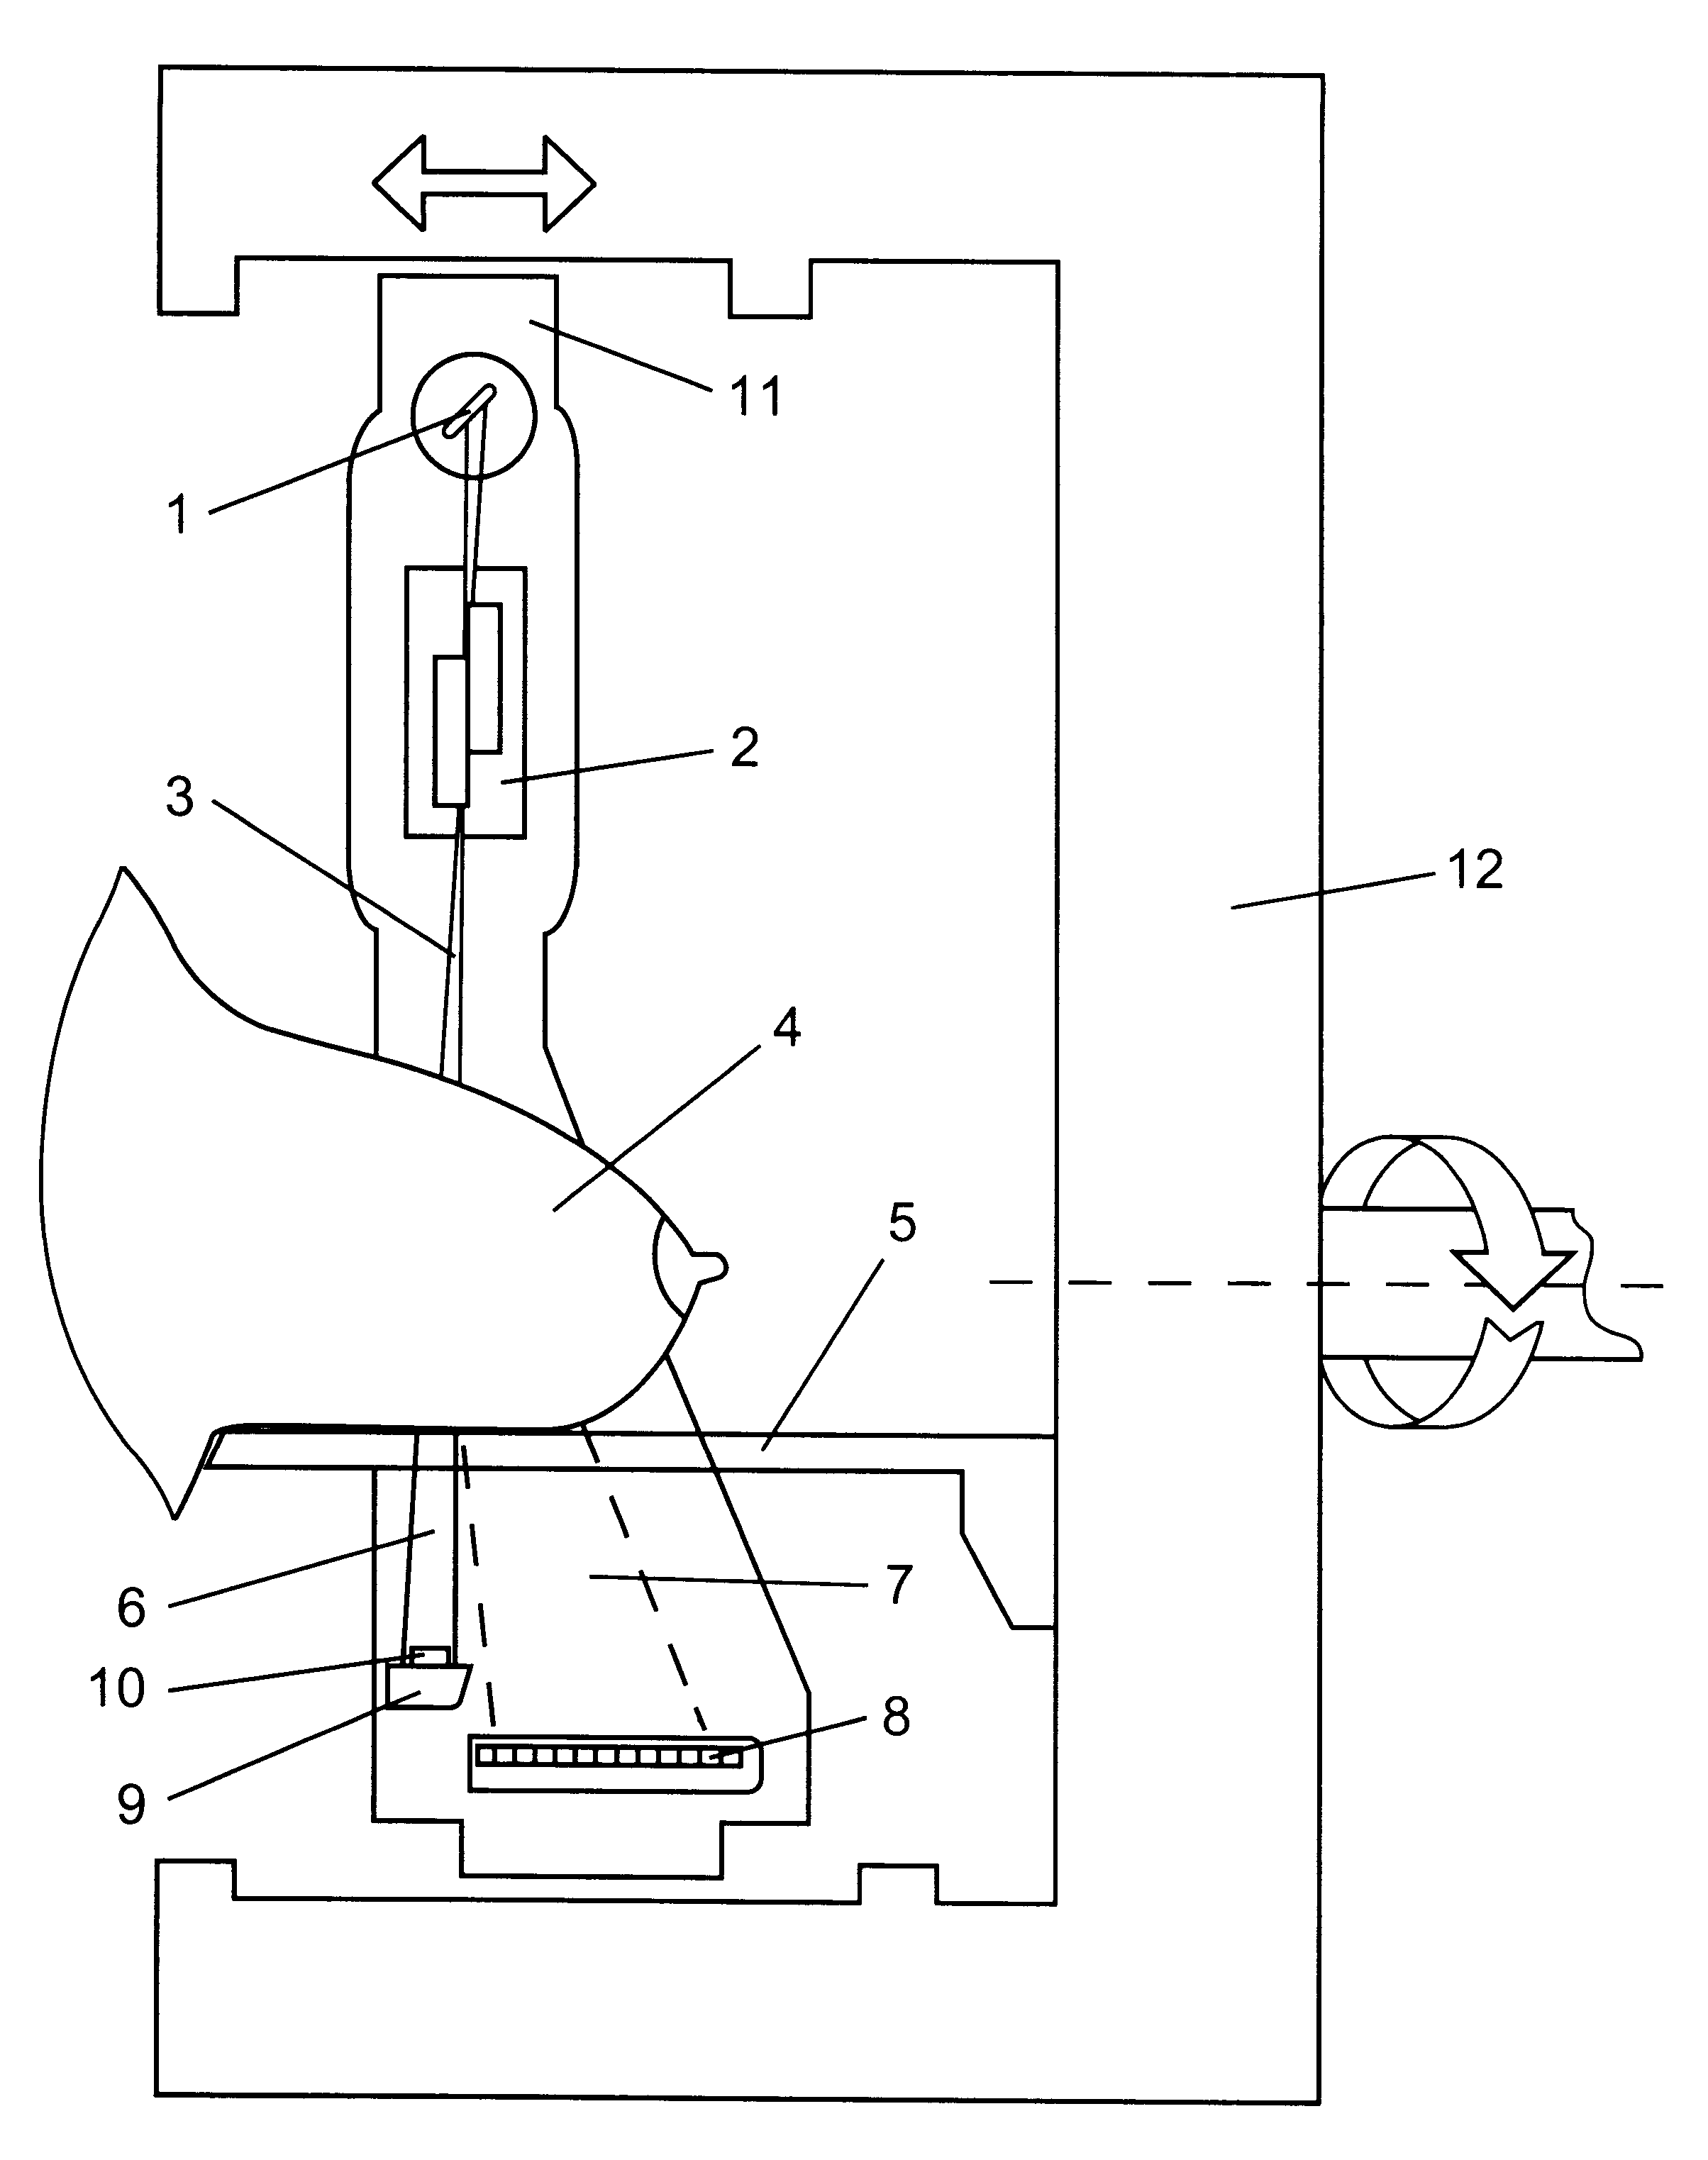 Reduced-angle mammography device and variants